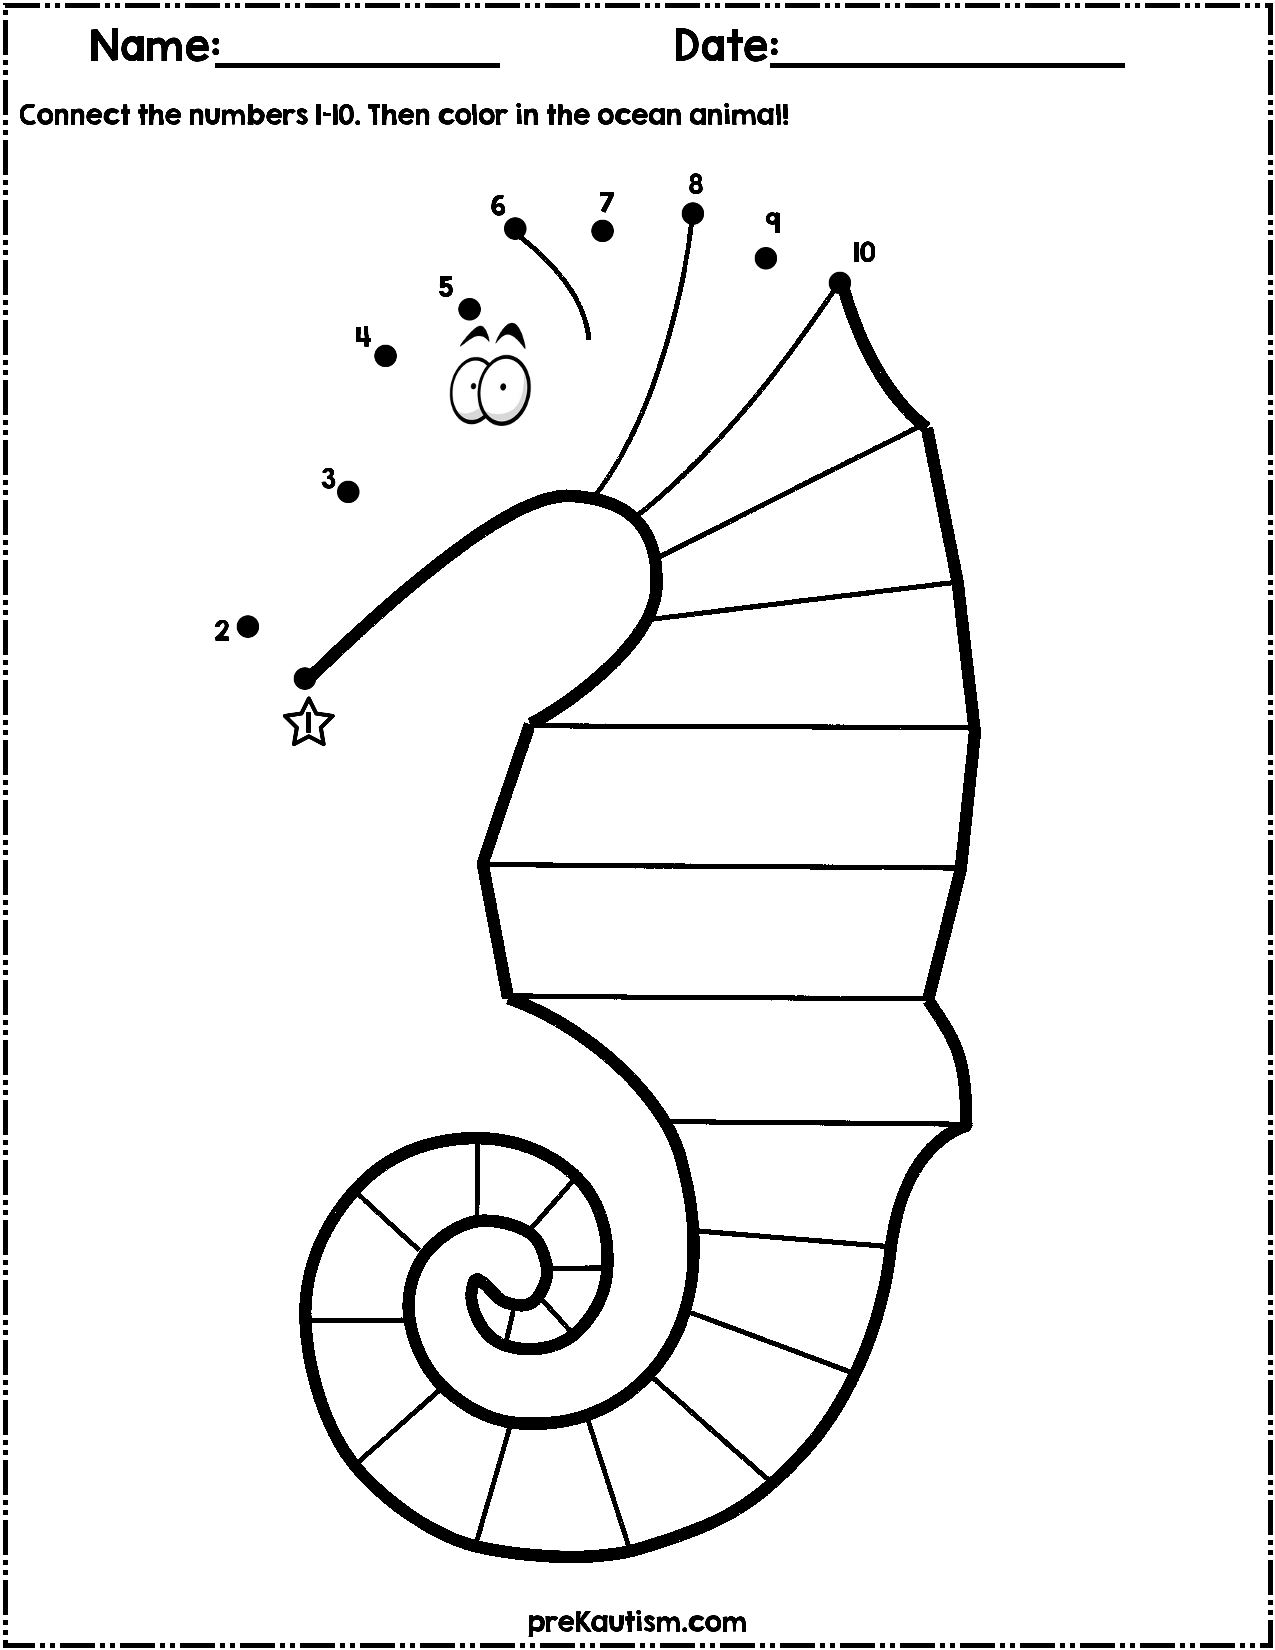 ocean-animals-dot-to-dot-worksheets-numbers-1-10-school-stuff-coloring-home